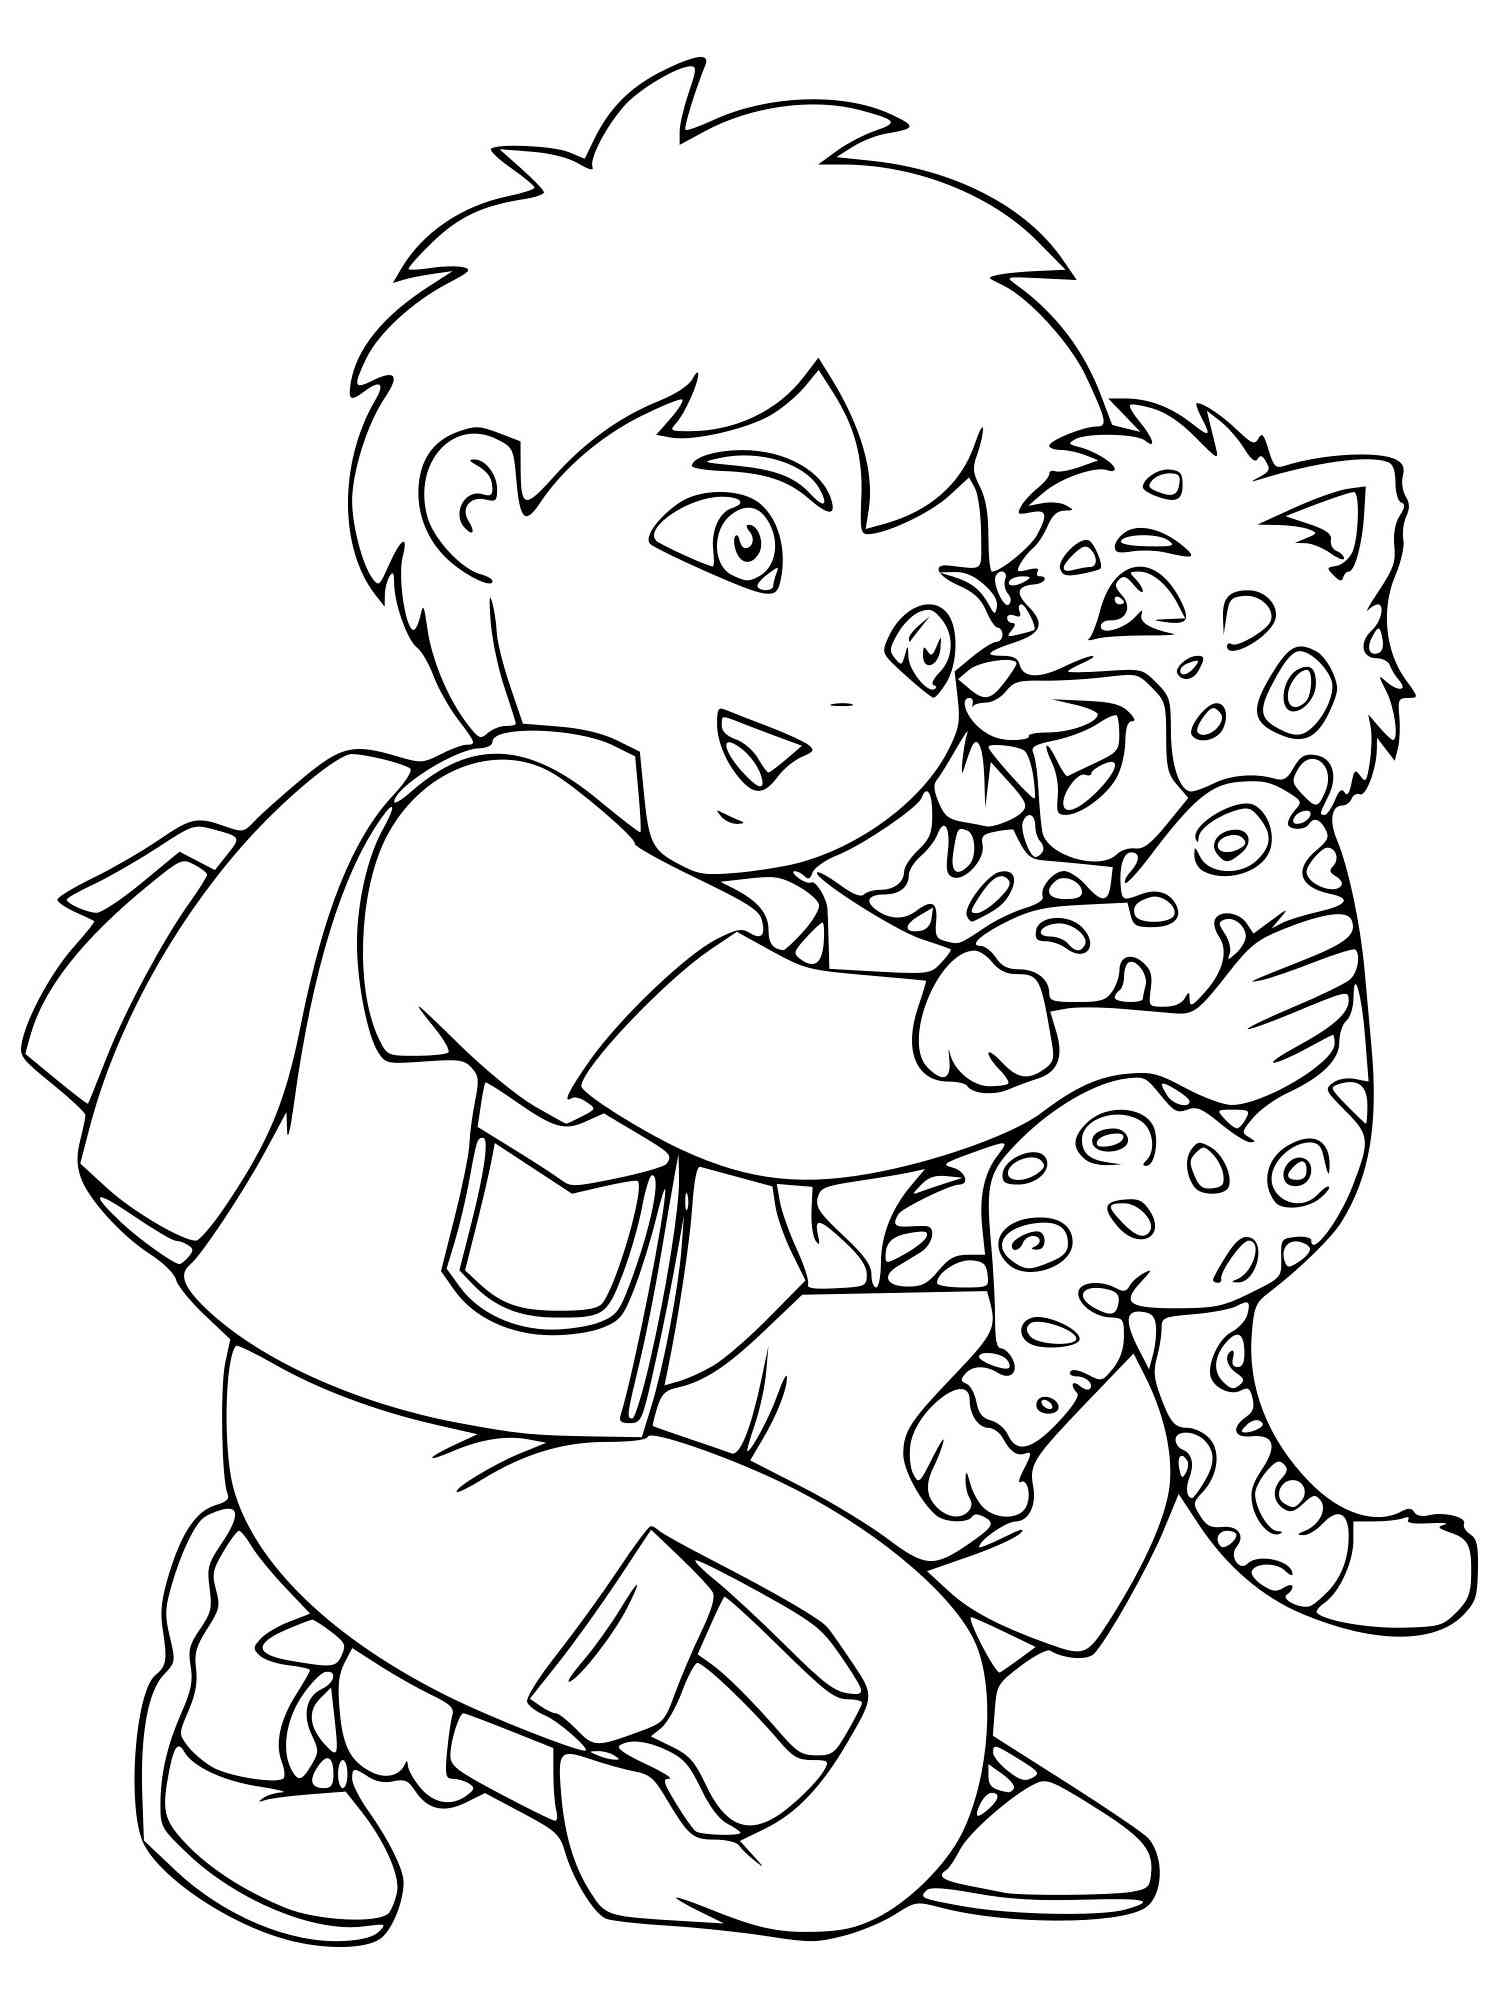 Diego 3 coloring page